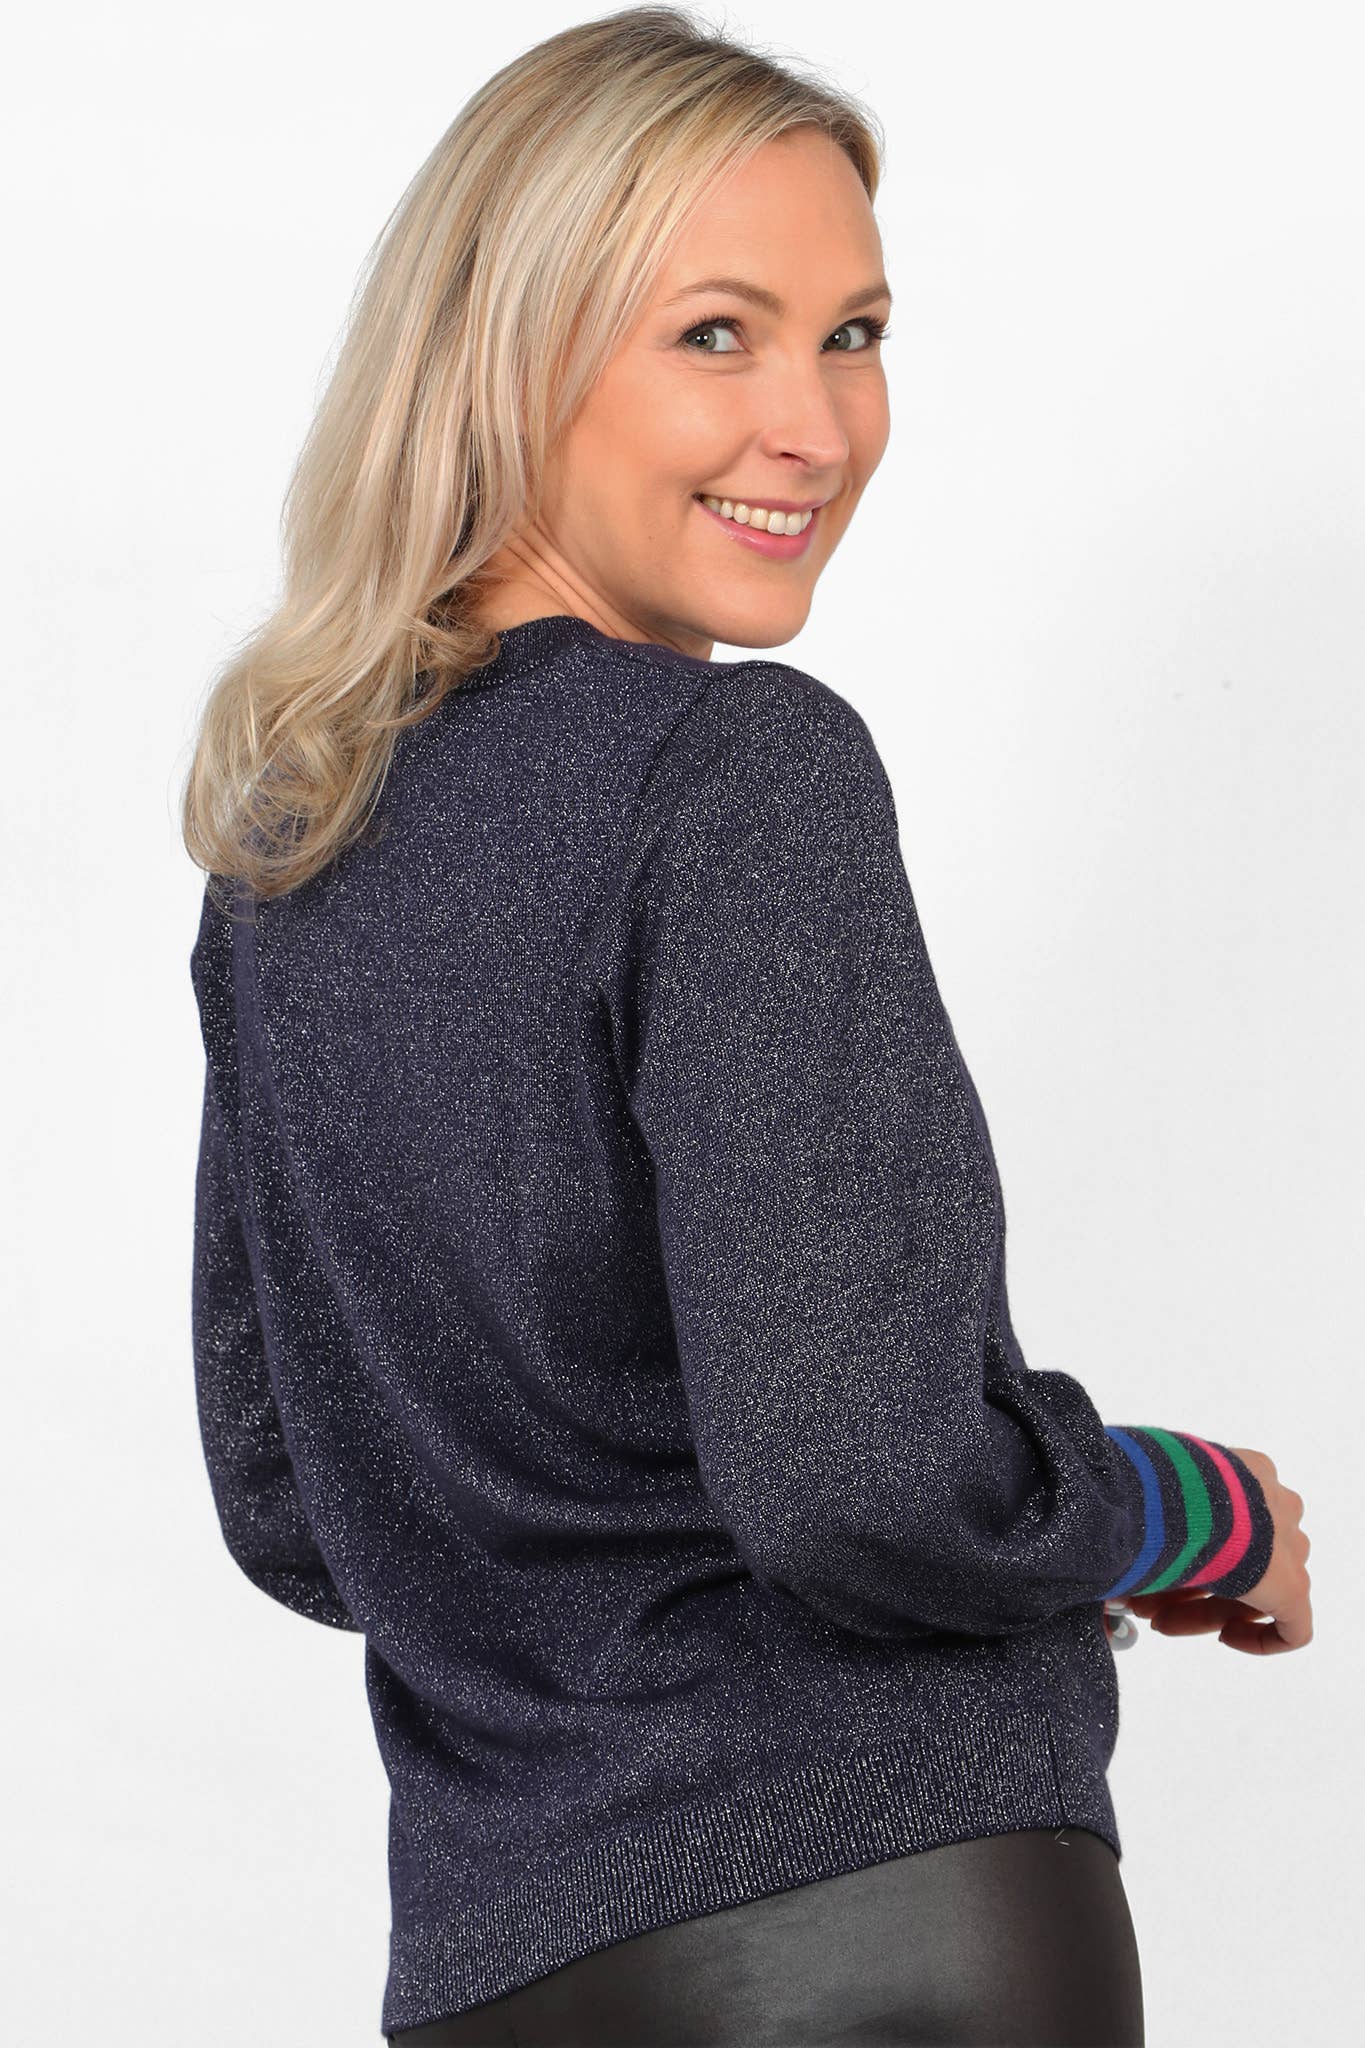 Navy Blue Multi Balloon Sleeve Jumper with Striped Cuff: Large (16-18)